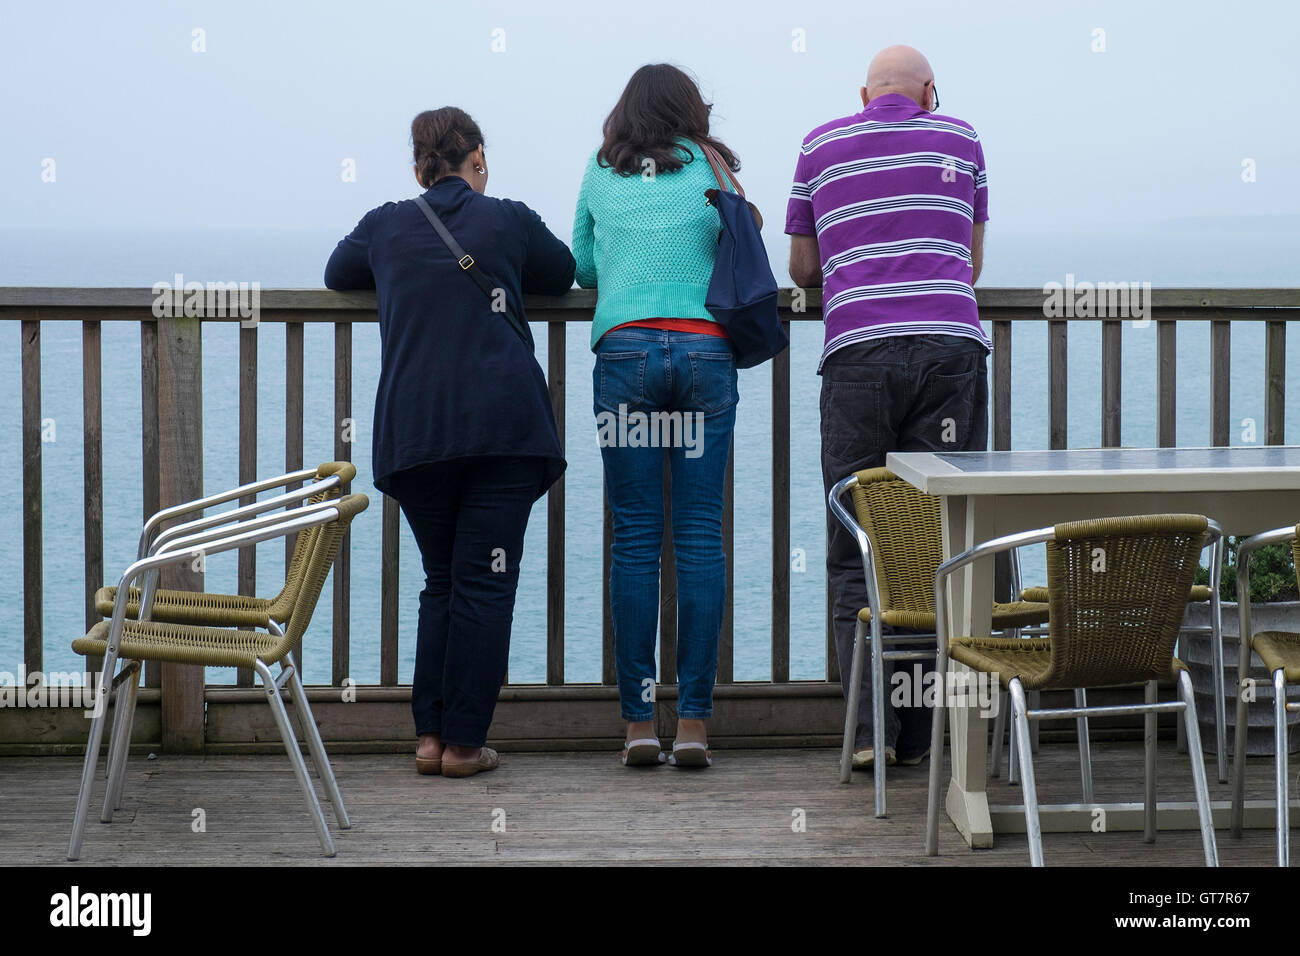 Three people stand on a balcony overlooking the sea. Stock Photo